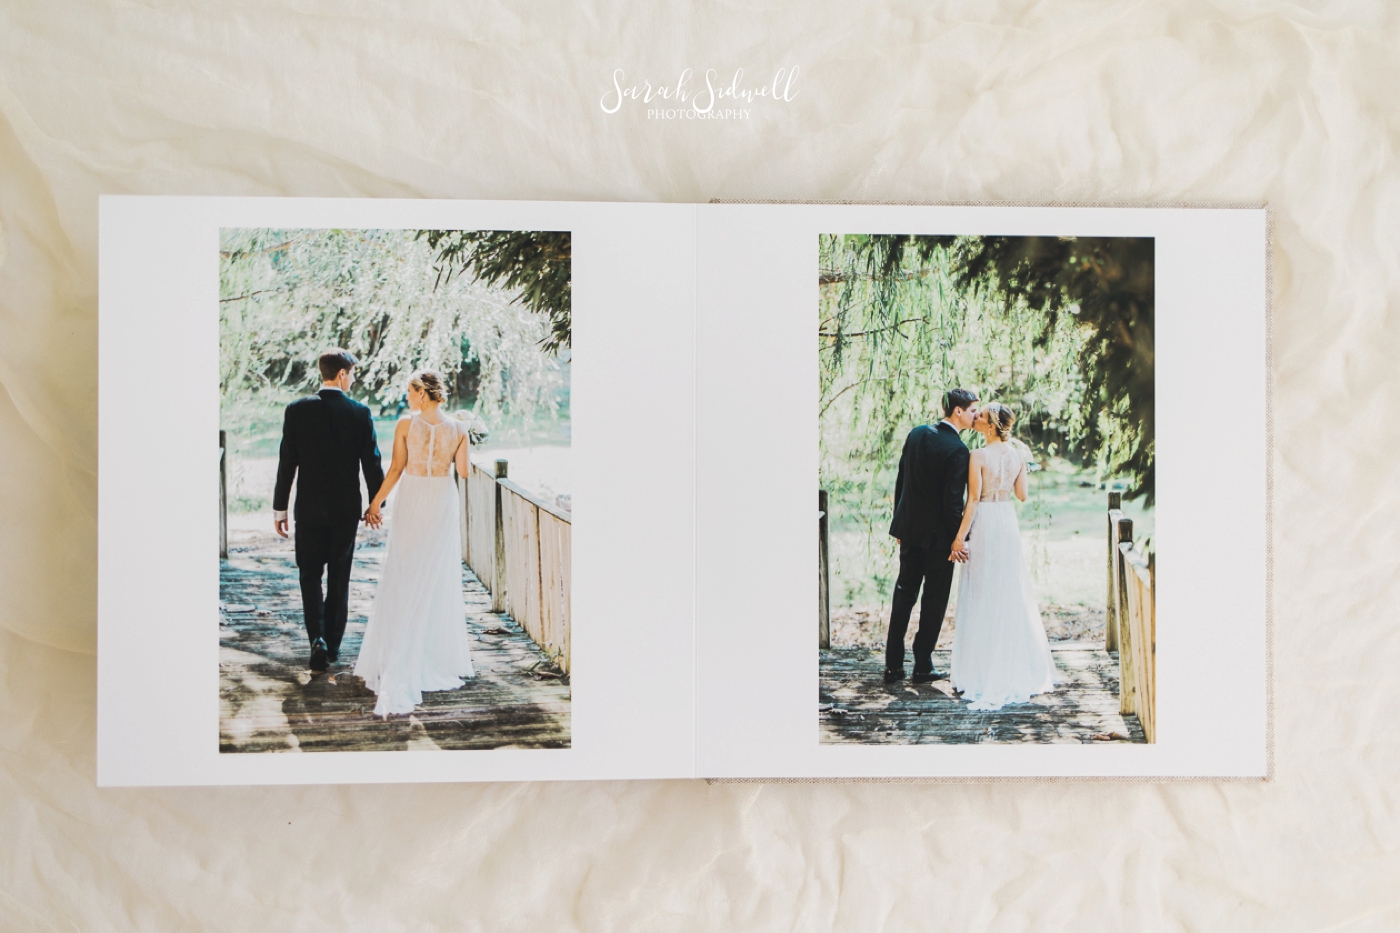 Another page of a wedding photo album is shown. 